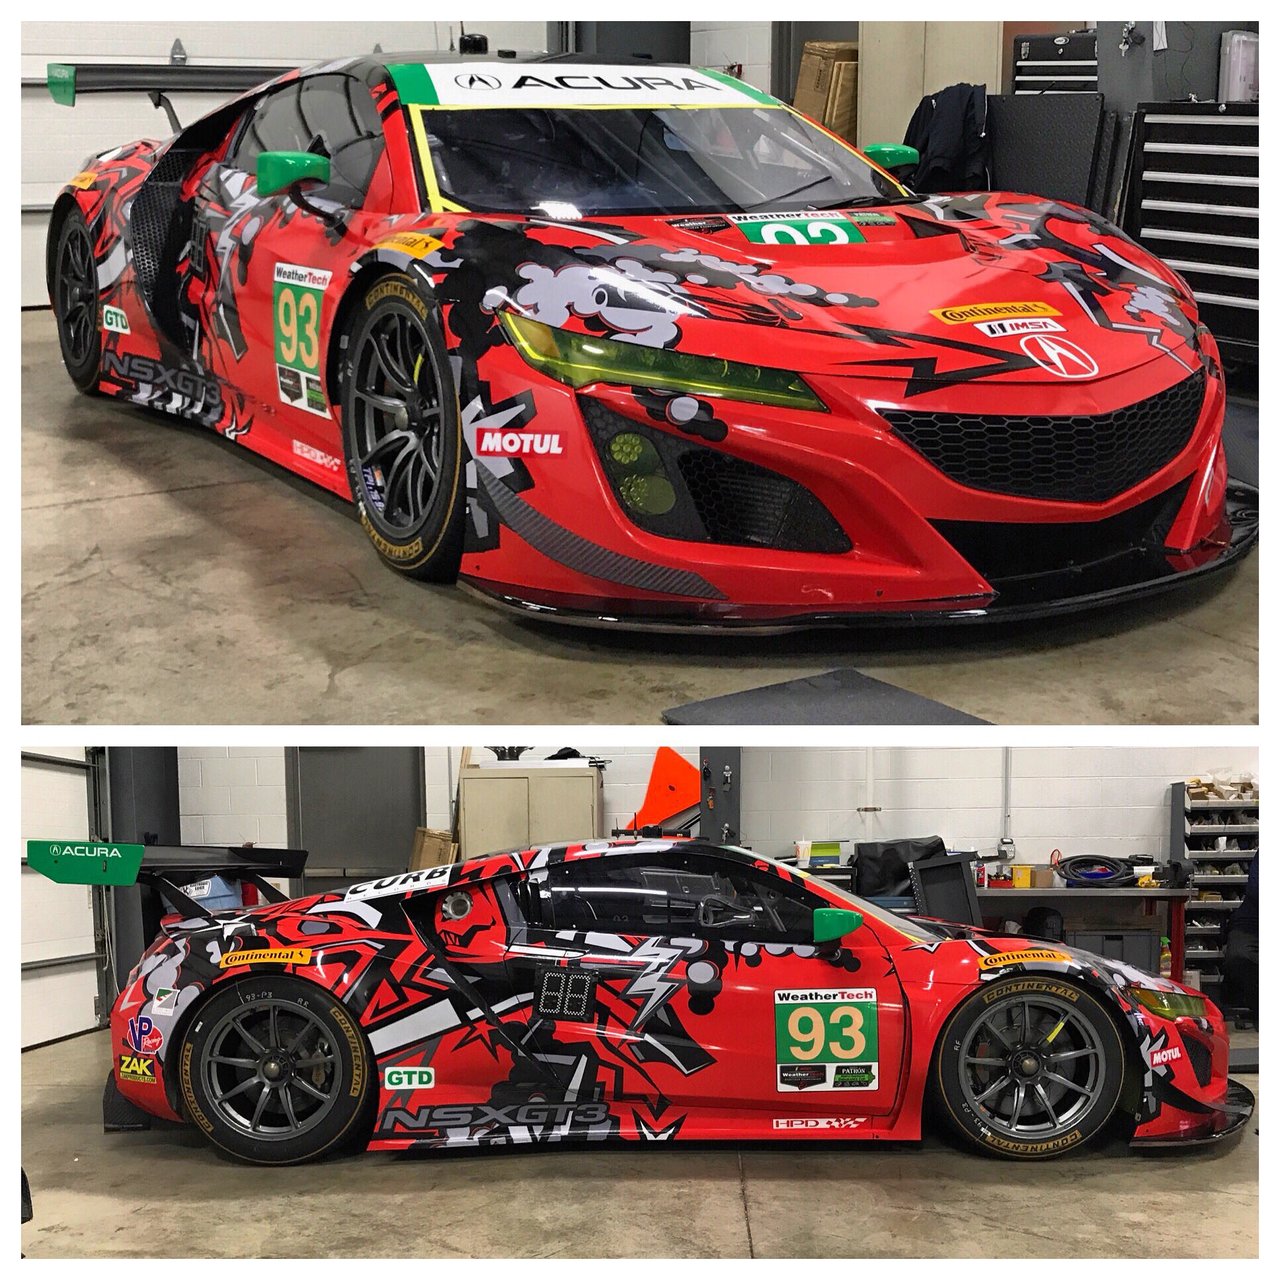 Introducing our graffiti livery for the 2018 IMSA season! This thing looks awesome! 🤩..#graffiti #art #color #red #cars #nsx #nsxgt3 #acura #racecar #views https://t.co/wg6NCtQWSf